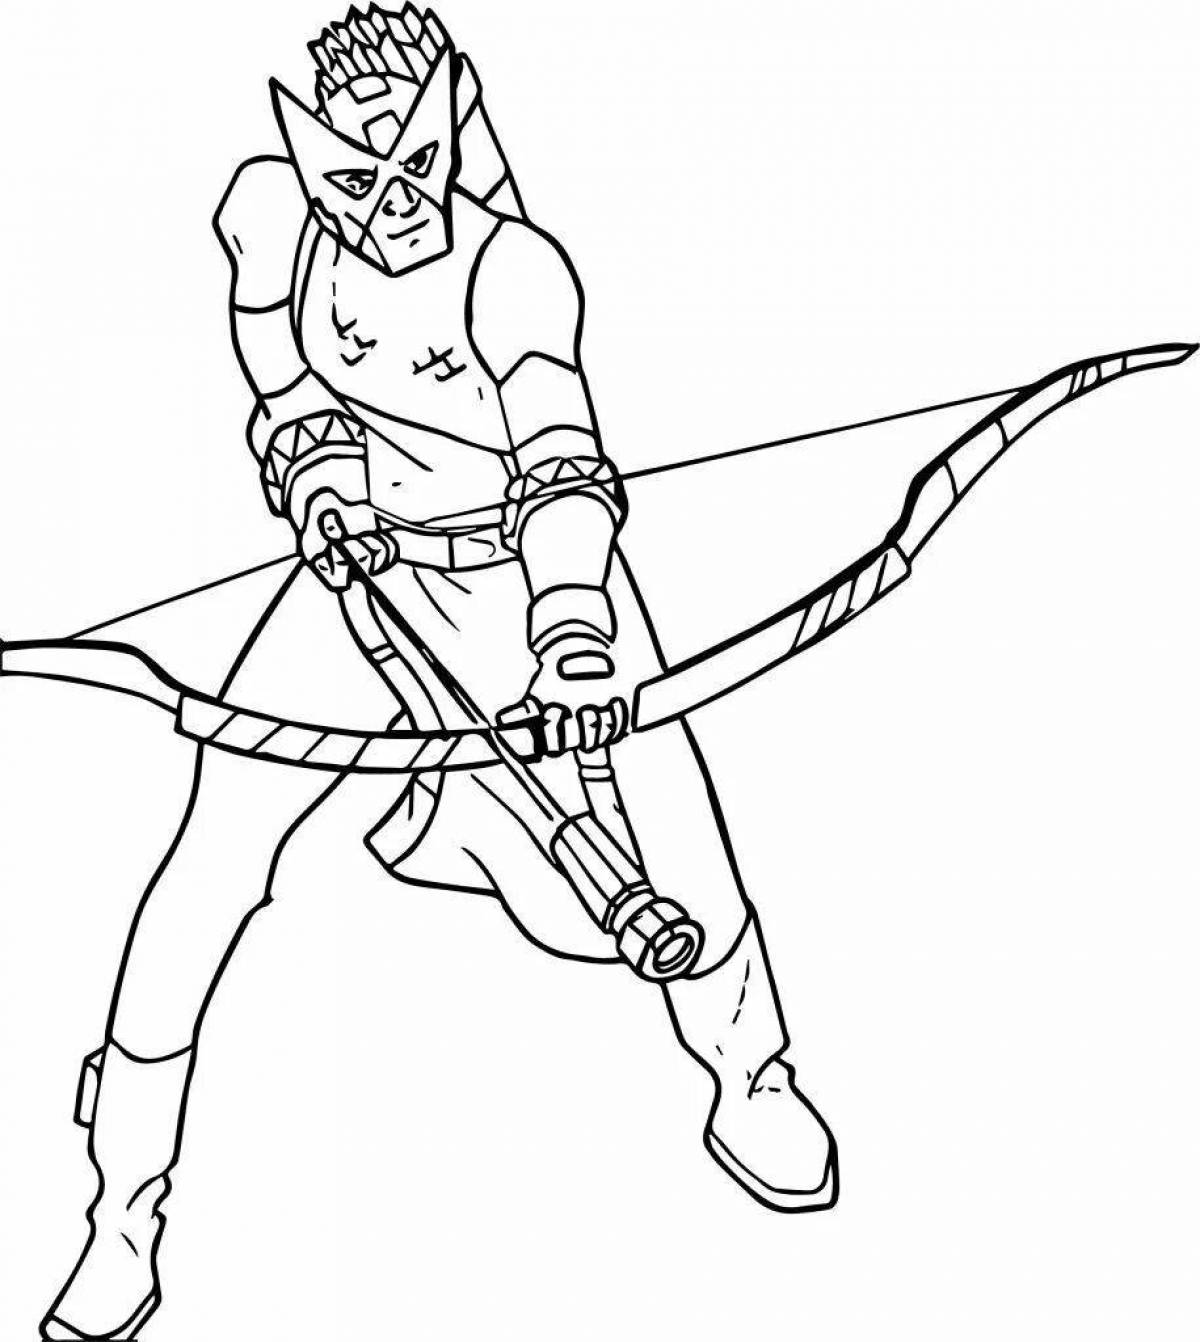 Decided archer coloring page